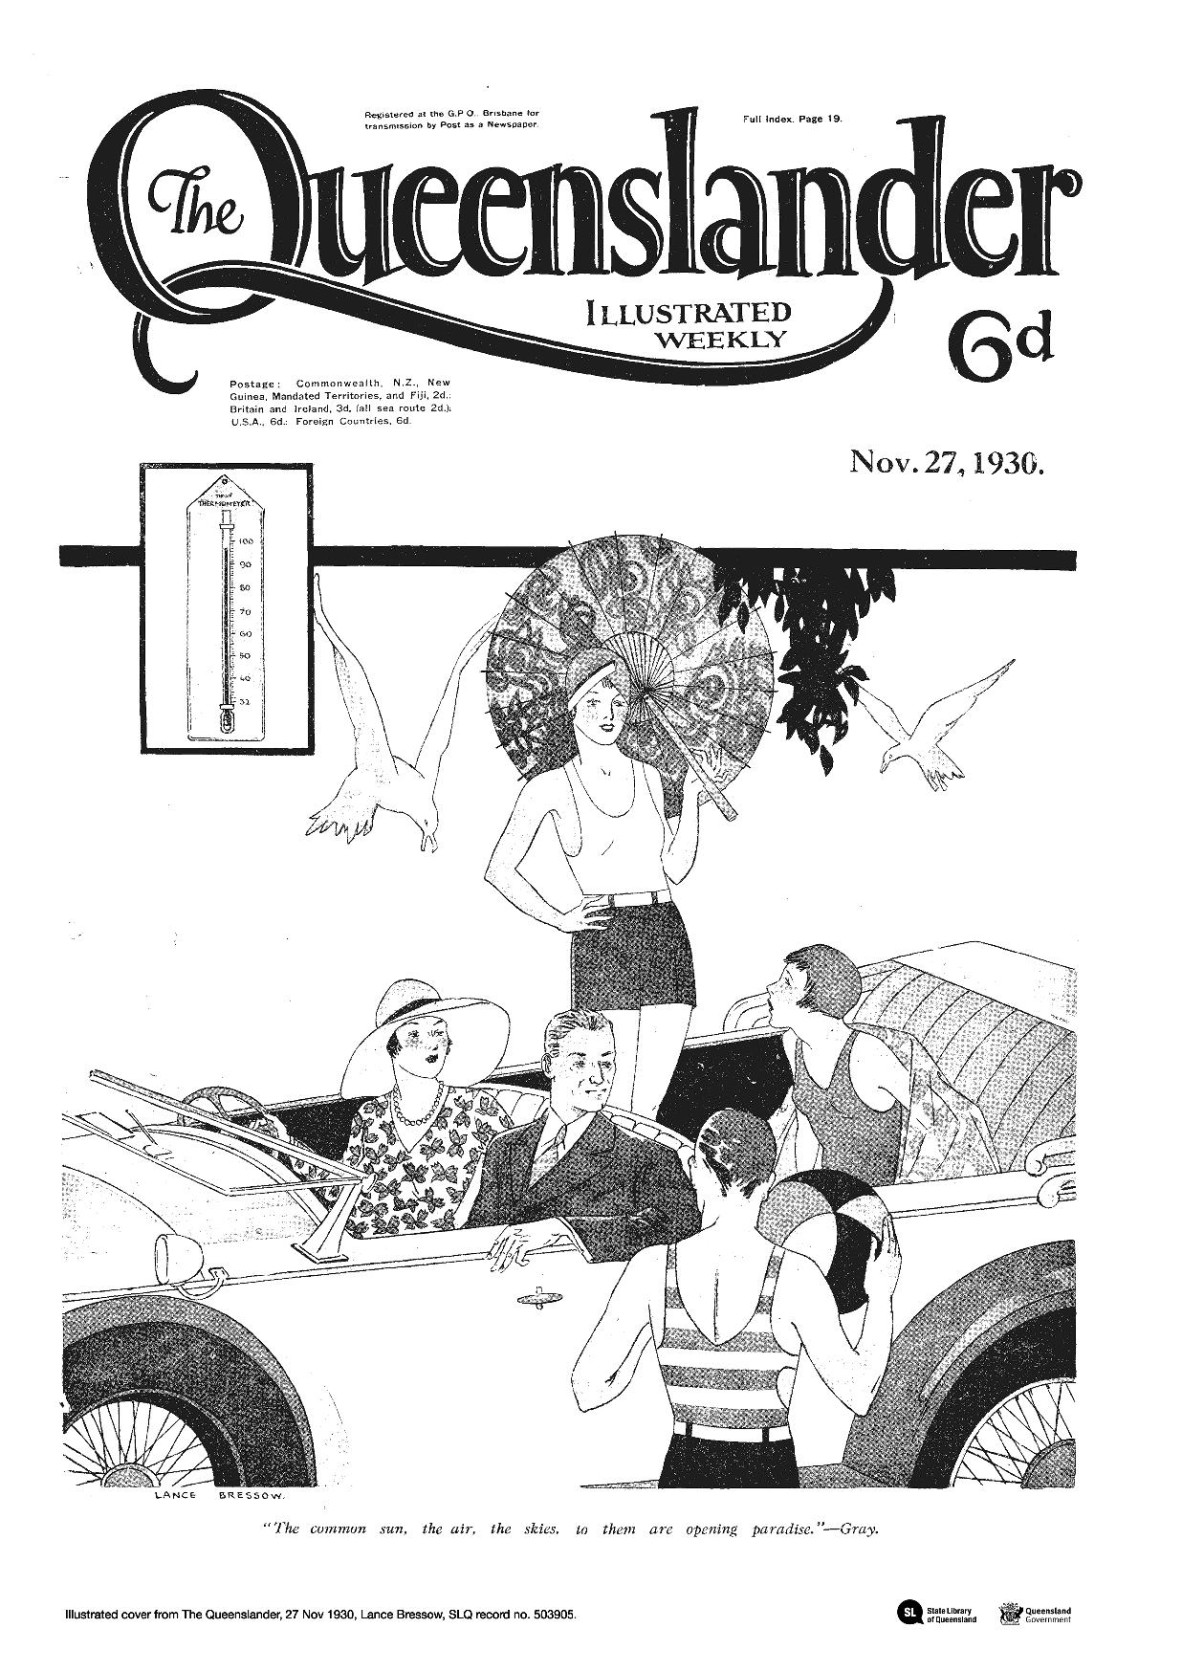 Front page cover of Illustrated Cover from The Queenslander 27 Nov 1930 The cover has a drawing one man and three ladies in a car and another person sanding outside the car holding a beach ball 